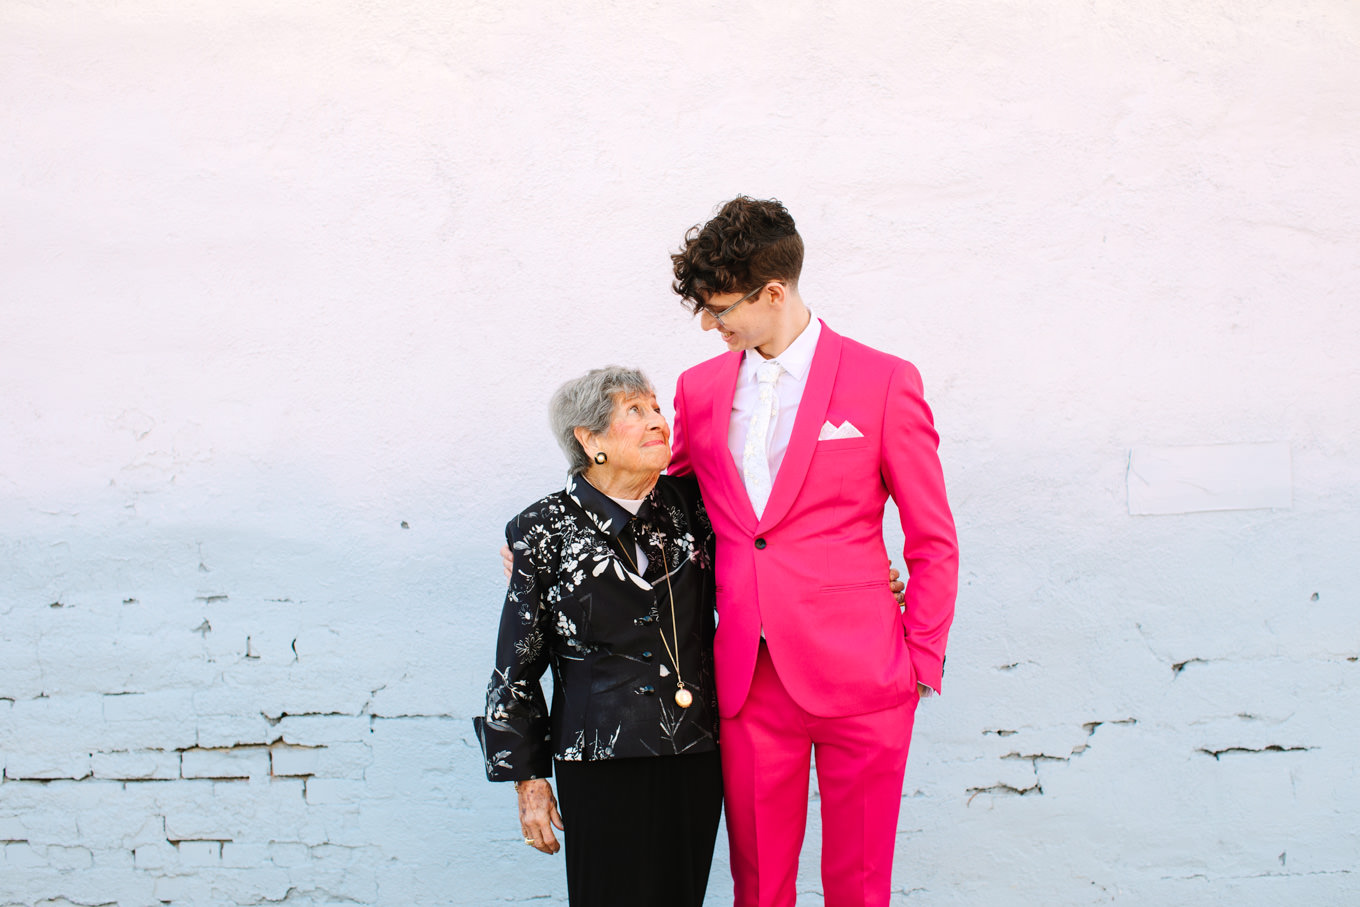 Groom in hot pink suit with his grandmother | Colorful wedding at The Unique Space Los Angeles published in The Knot Magazine | Fresh and colorful photography for fun-loving couples in Southern California | #colorfulwedding #losangeleswedding #weddingphotography #uniquespace Source: Mary Costa Photography | Los Angeles